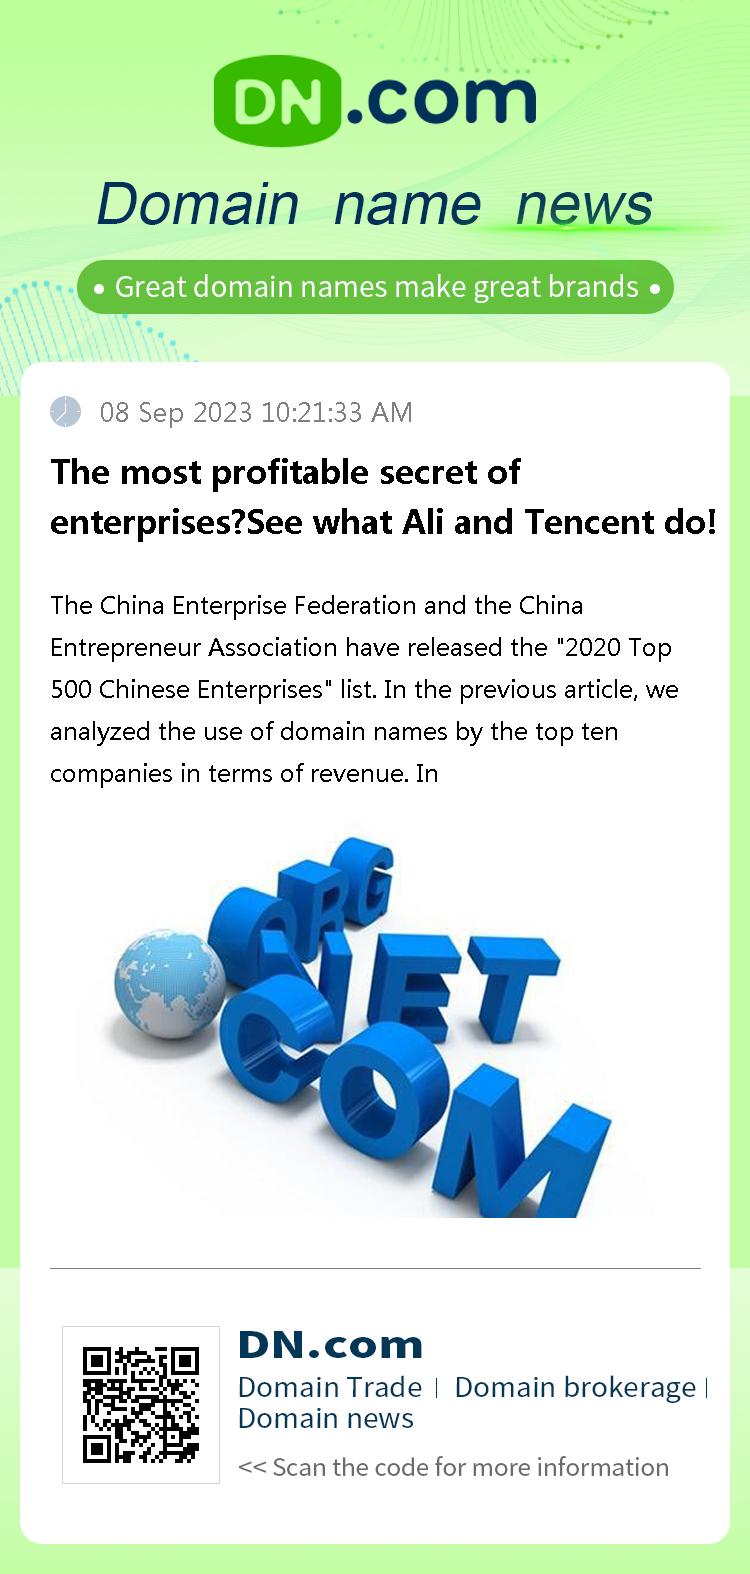 The most profitable secret of enterprises?See what Ali and Tencent do!